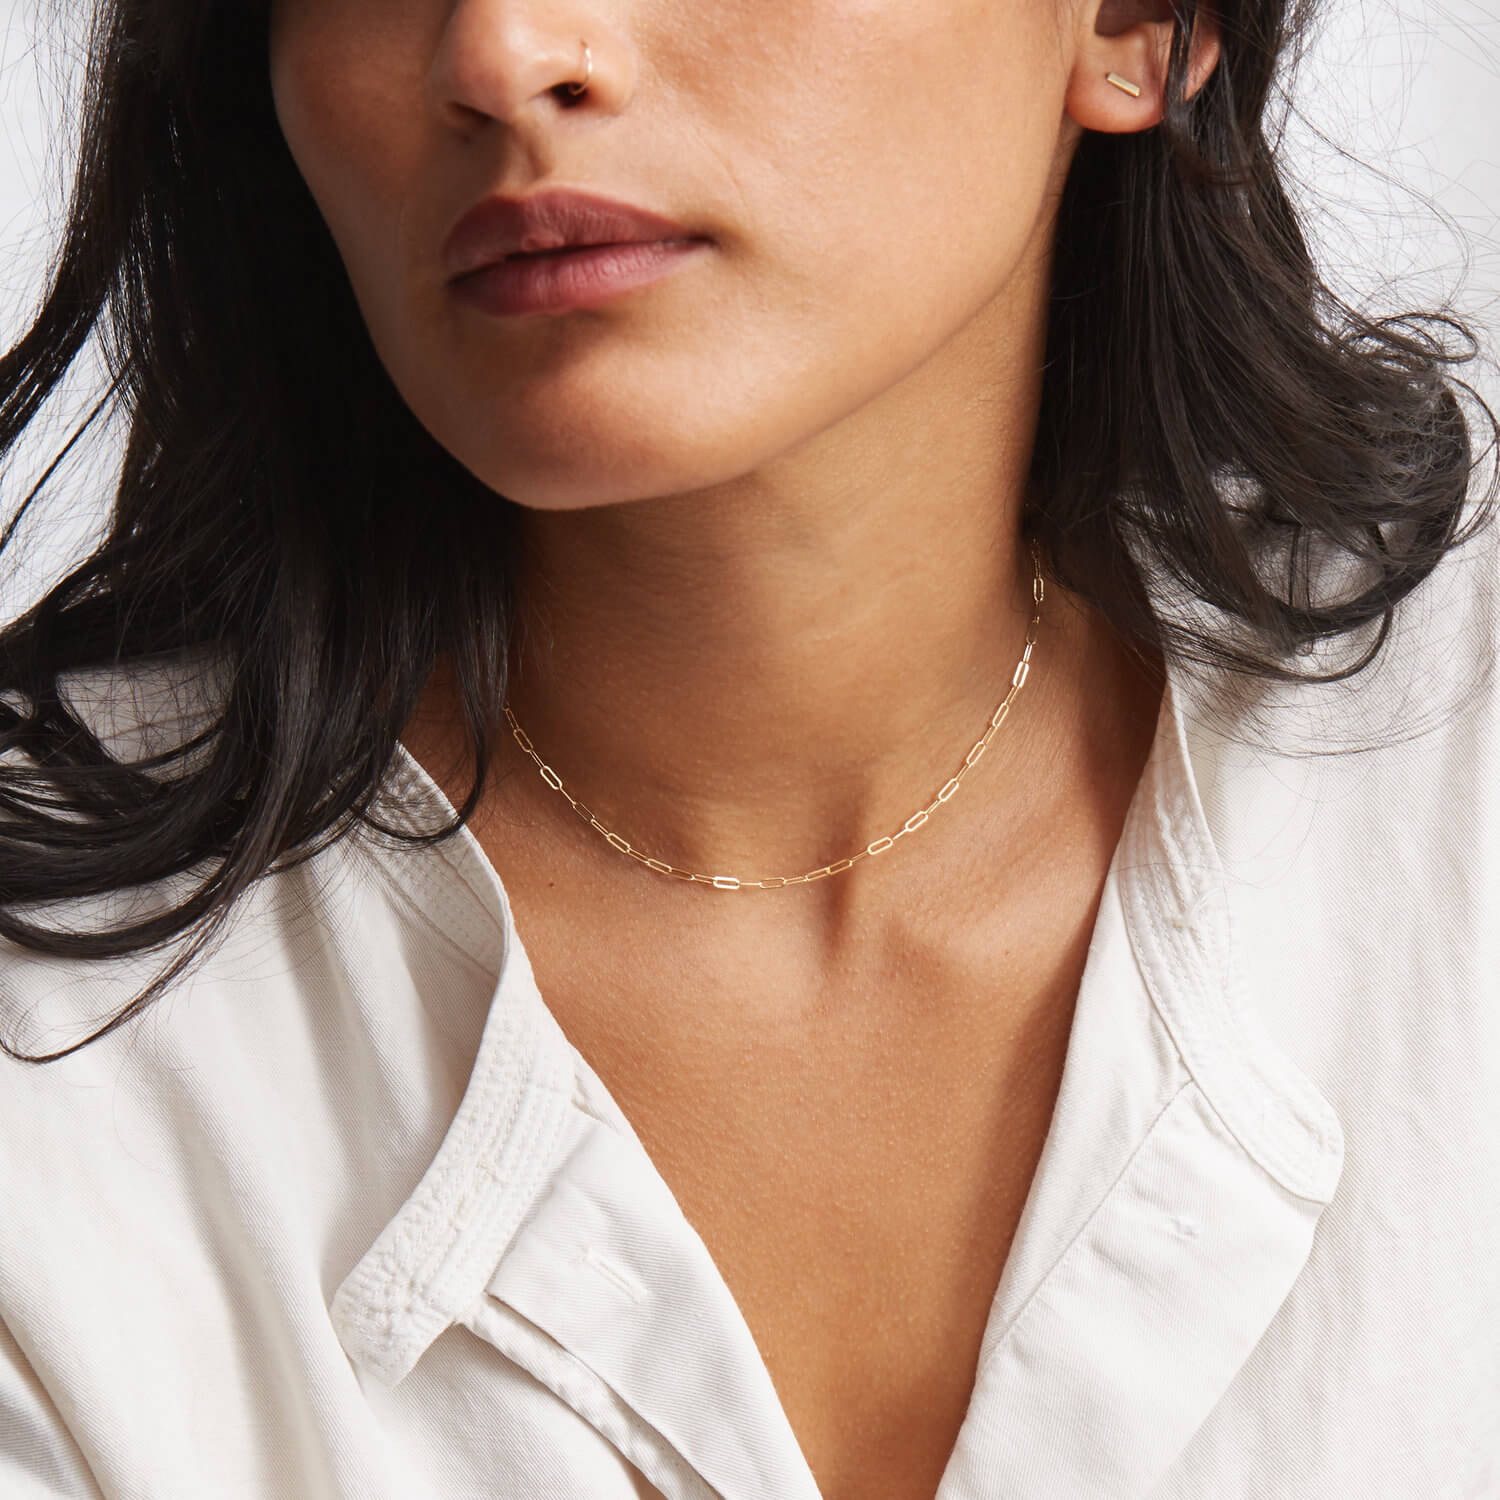 GLDN Dainty Paperclip Chain 14K Gold Fill